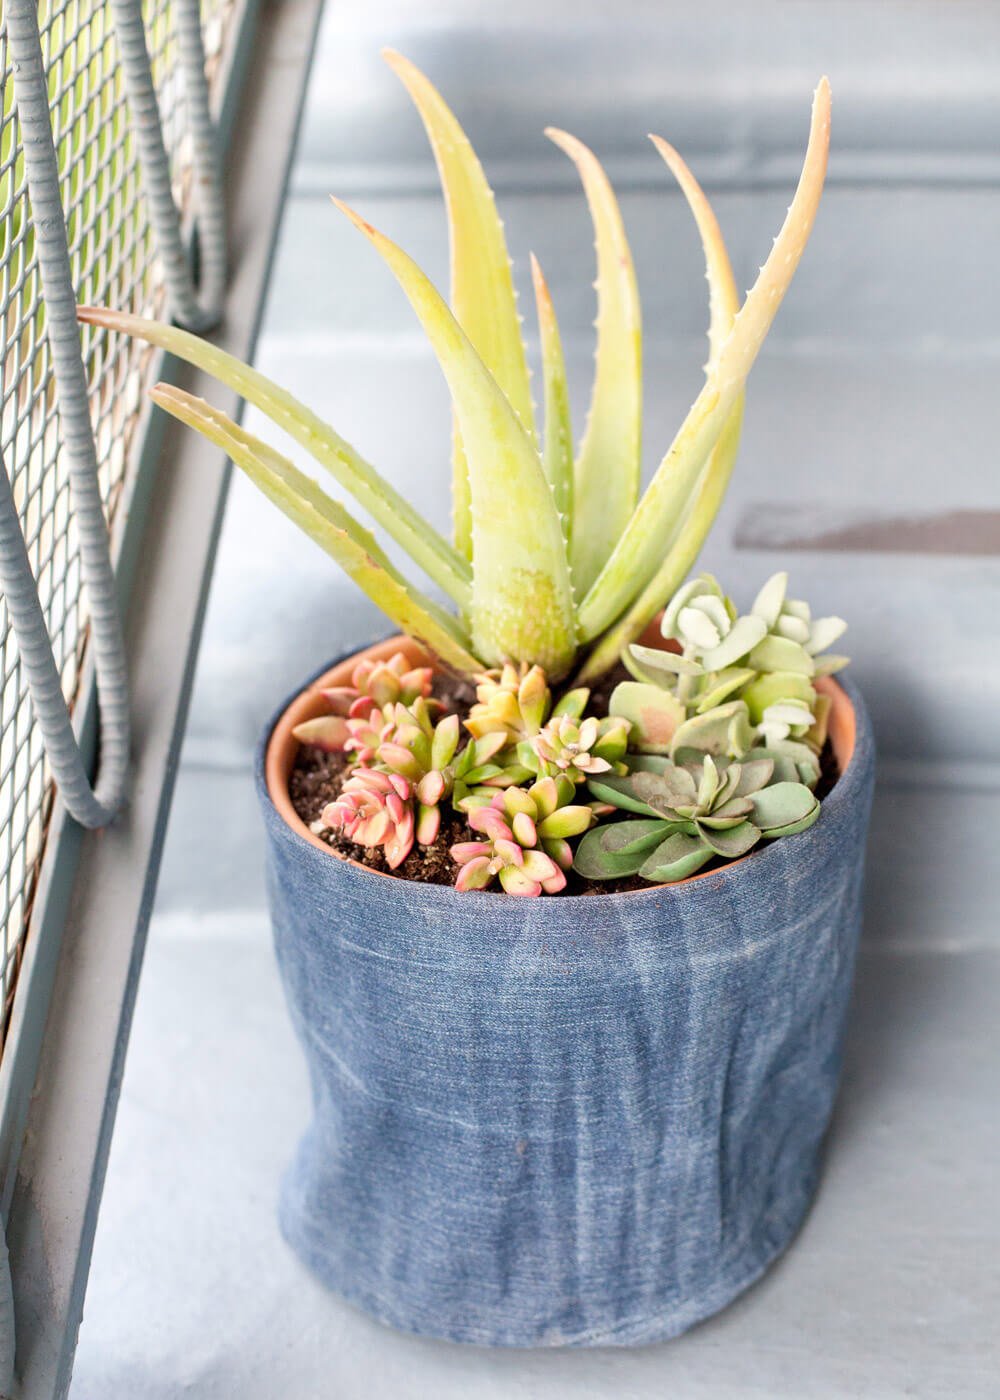 Your Plants' Favorite Pair of Jeans